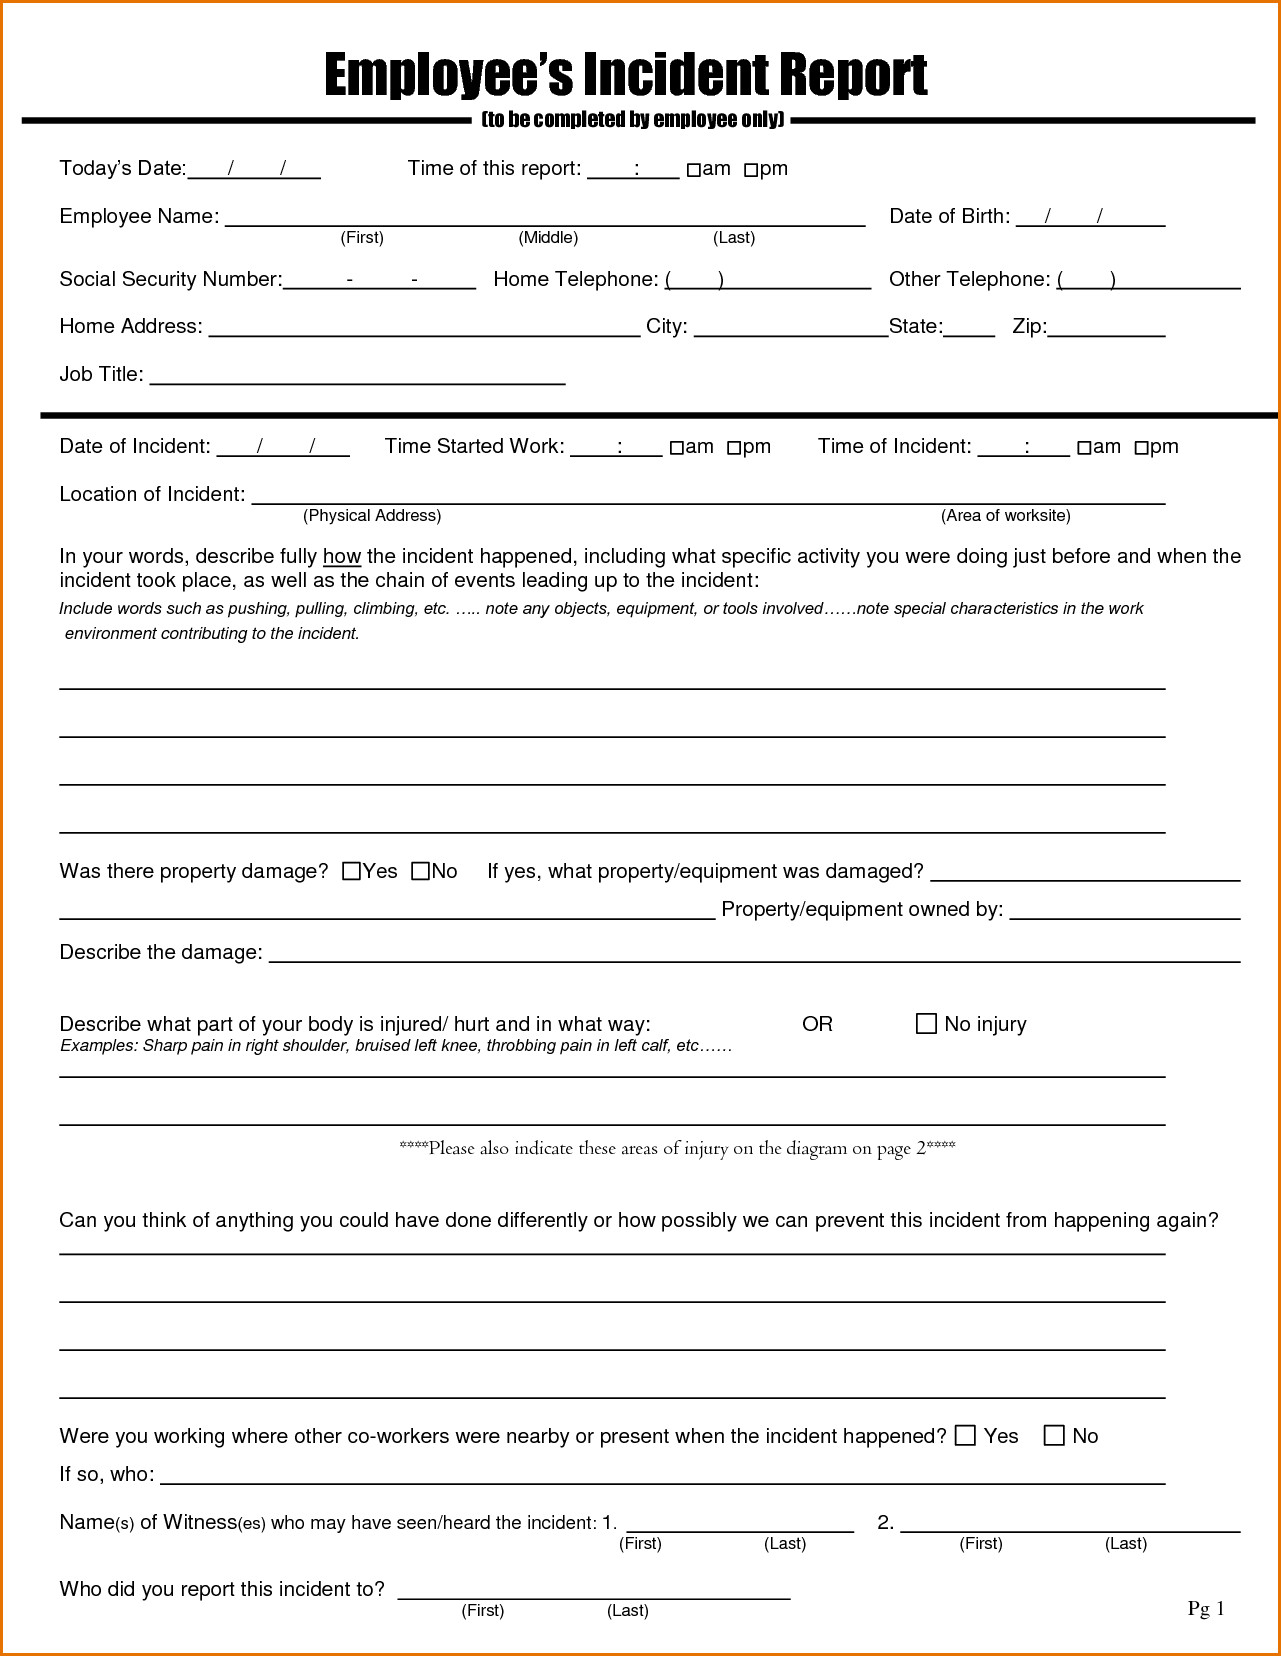 Employee Incident Report Forms